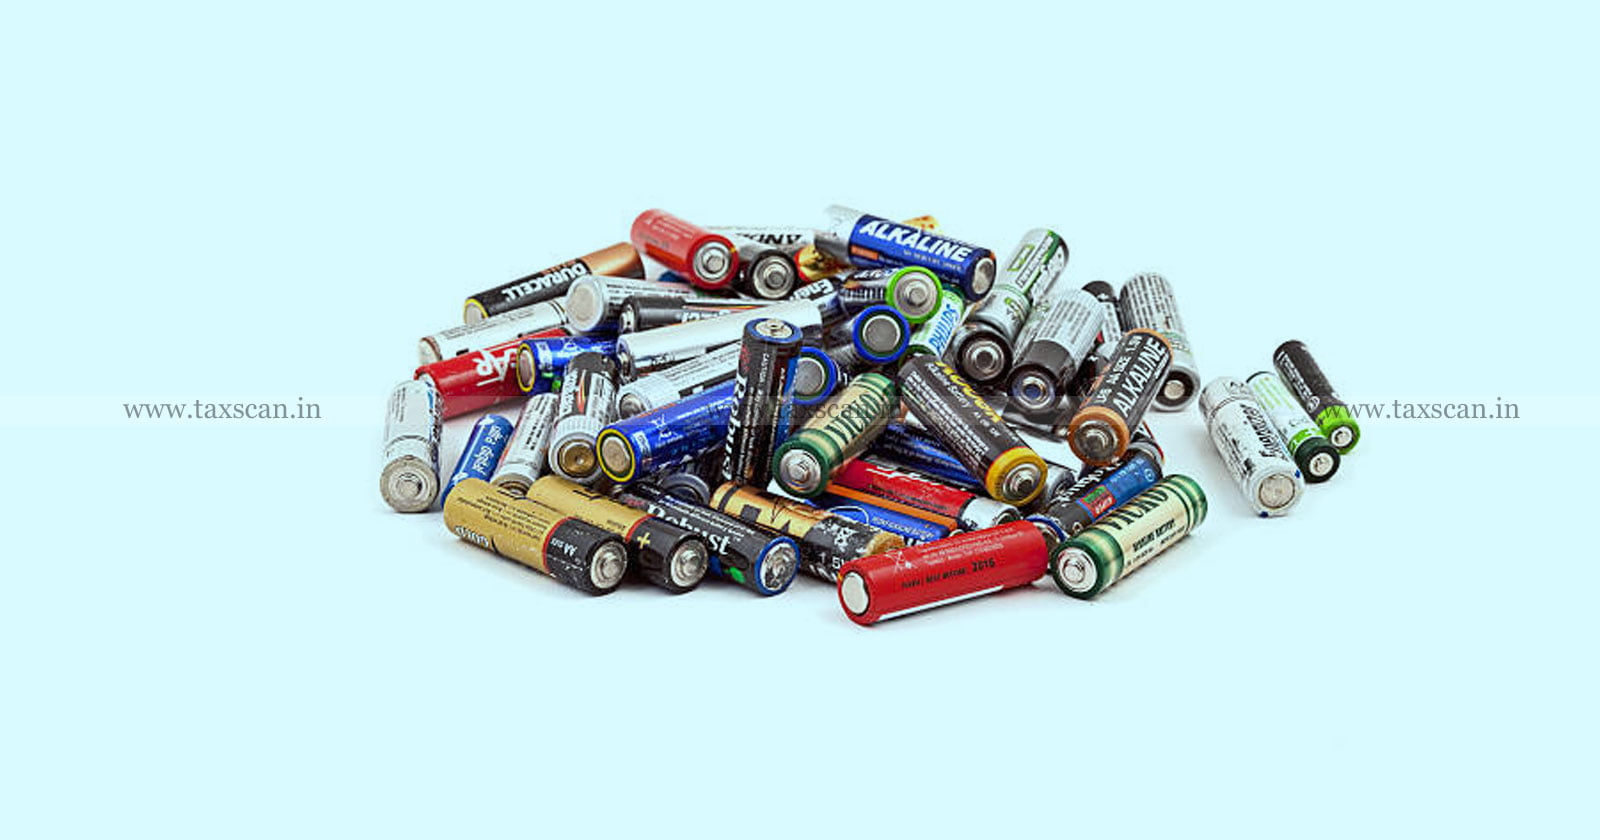 Selling of Old Batteries - Old Batteries - penalty - GST law - penalty under GST law - Allahabad High Court - GST - Taxscan